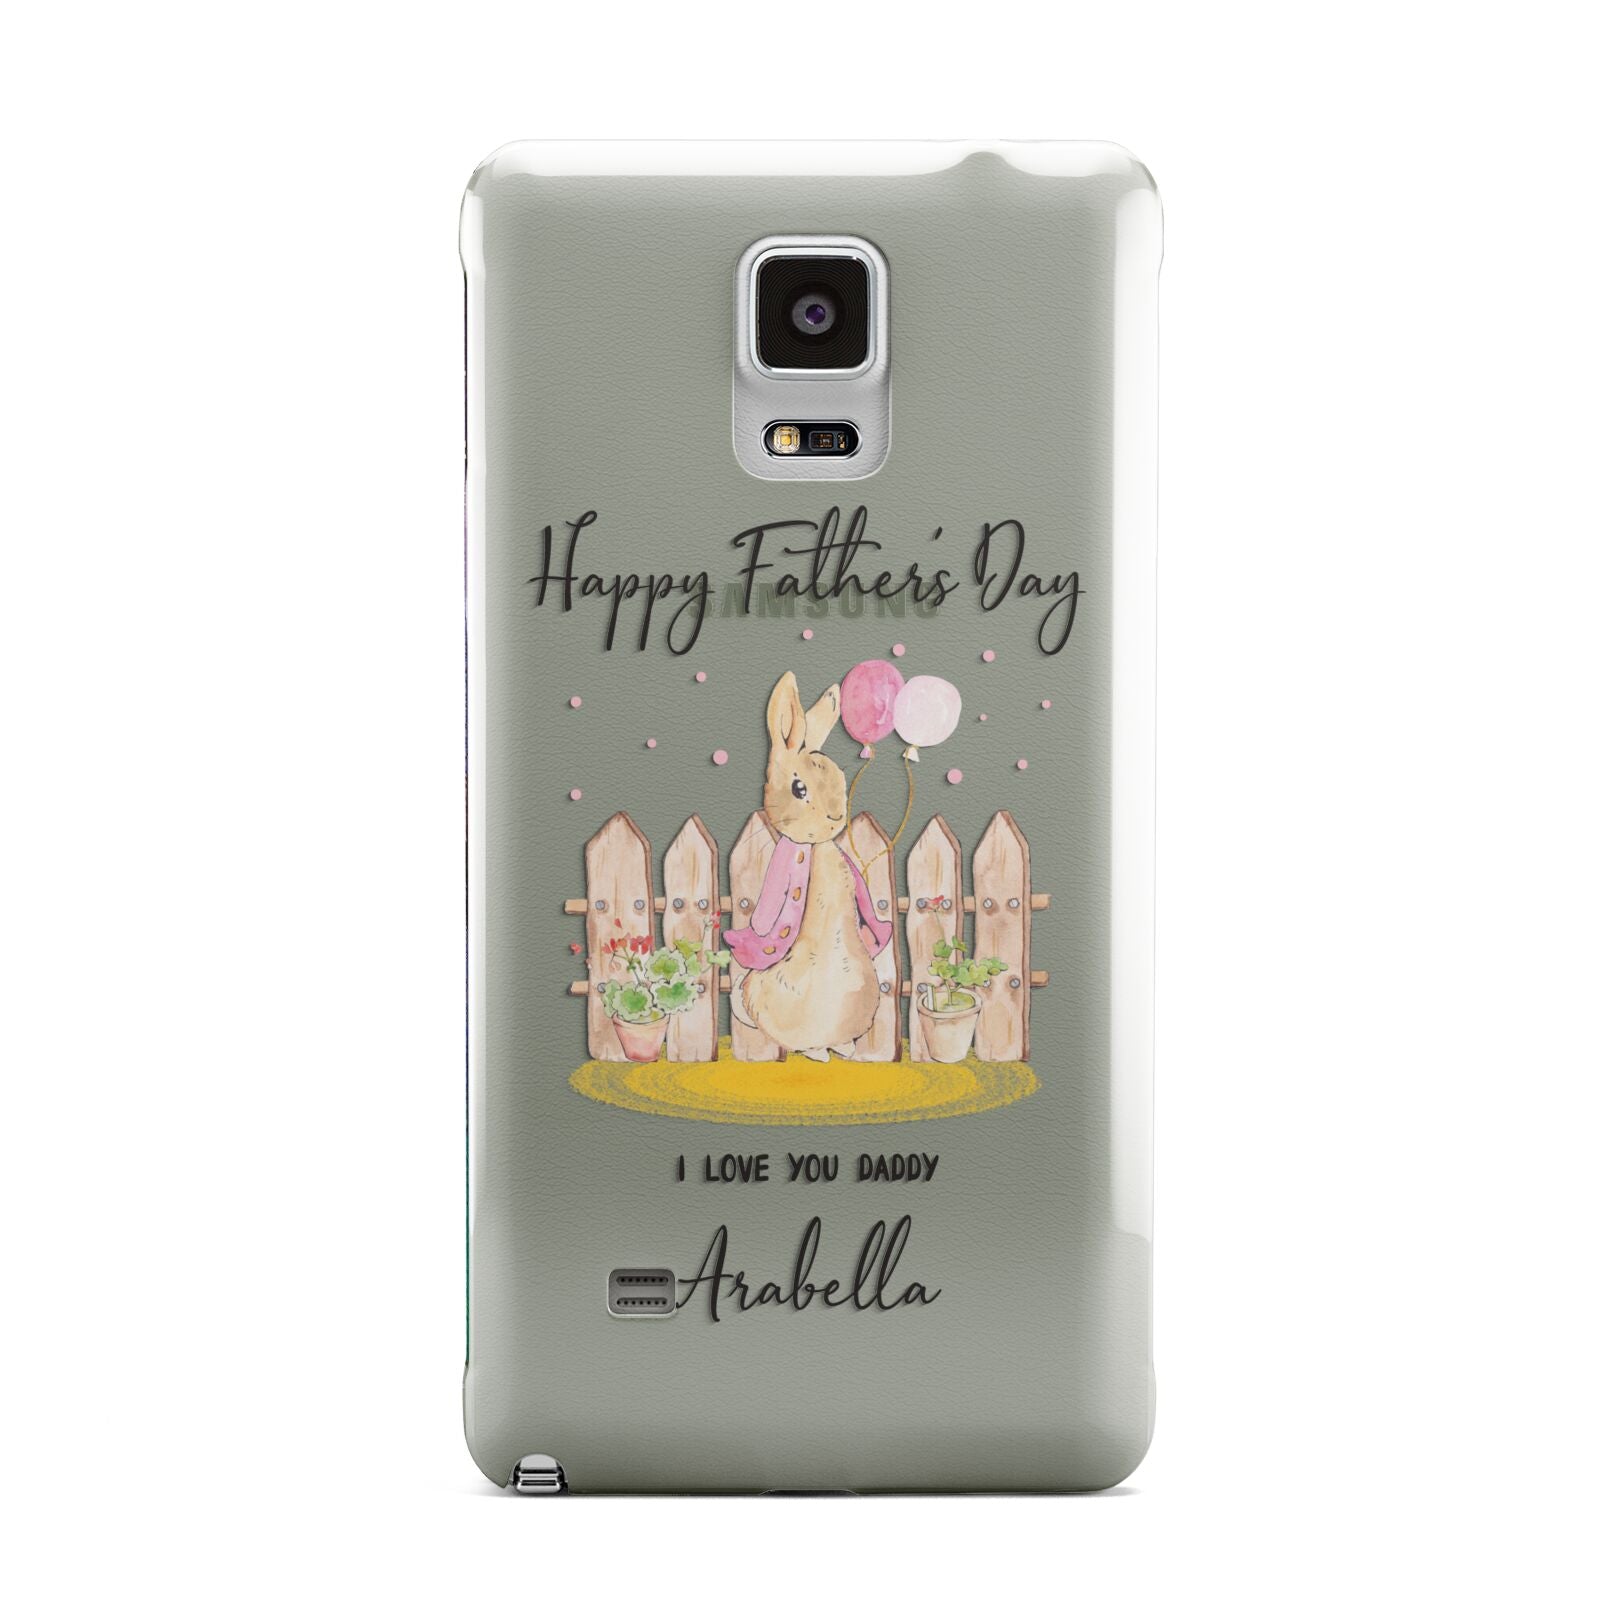 Fathers Day Girl Rabbit Samsung Galaxy Note 4 Case